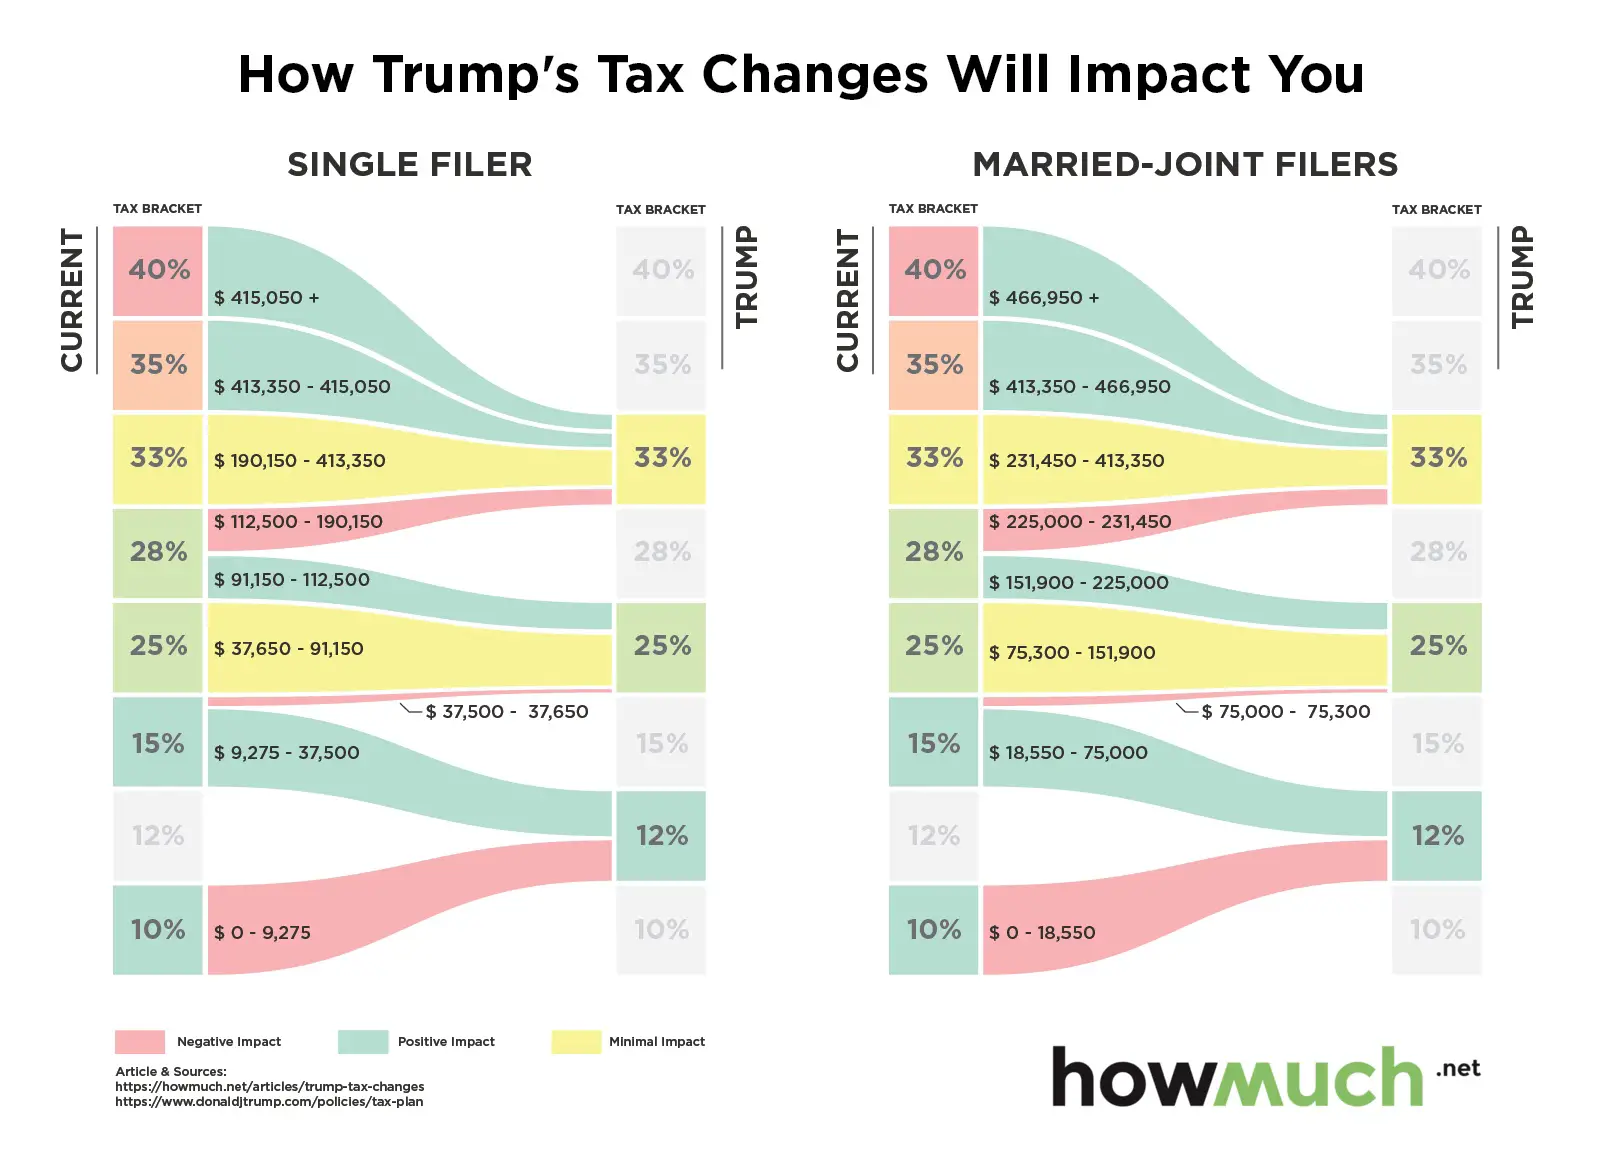 How Trumps tax cuts (and hikes) will impact you ...